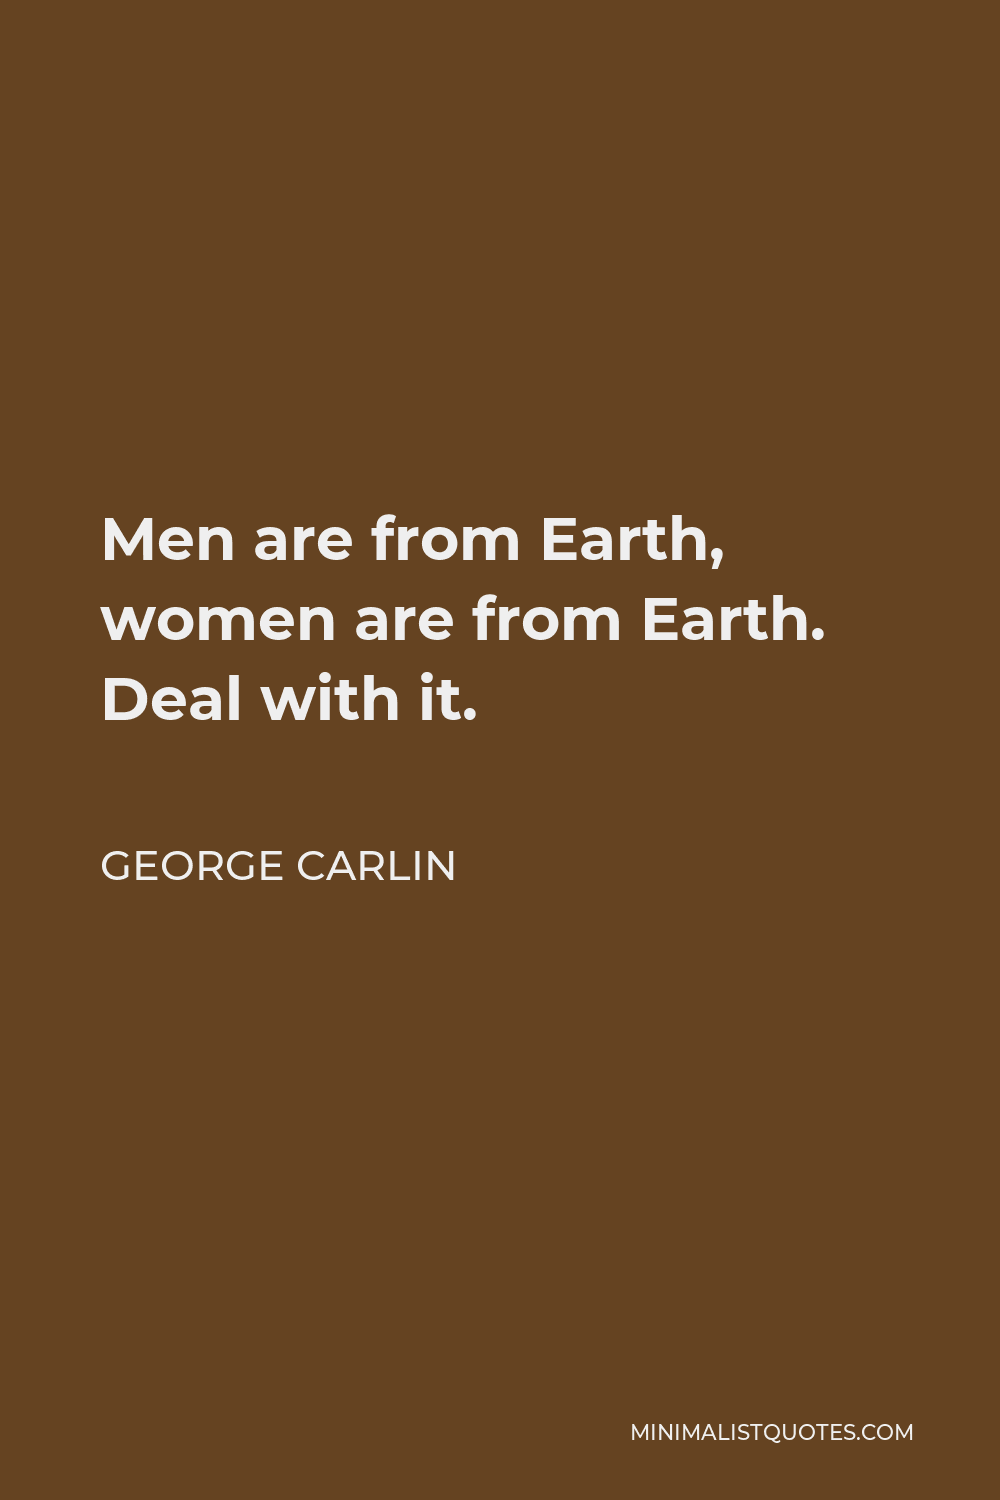 George Carlin Quote - Men are from Earth, women are from Earth. Deal with it.